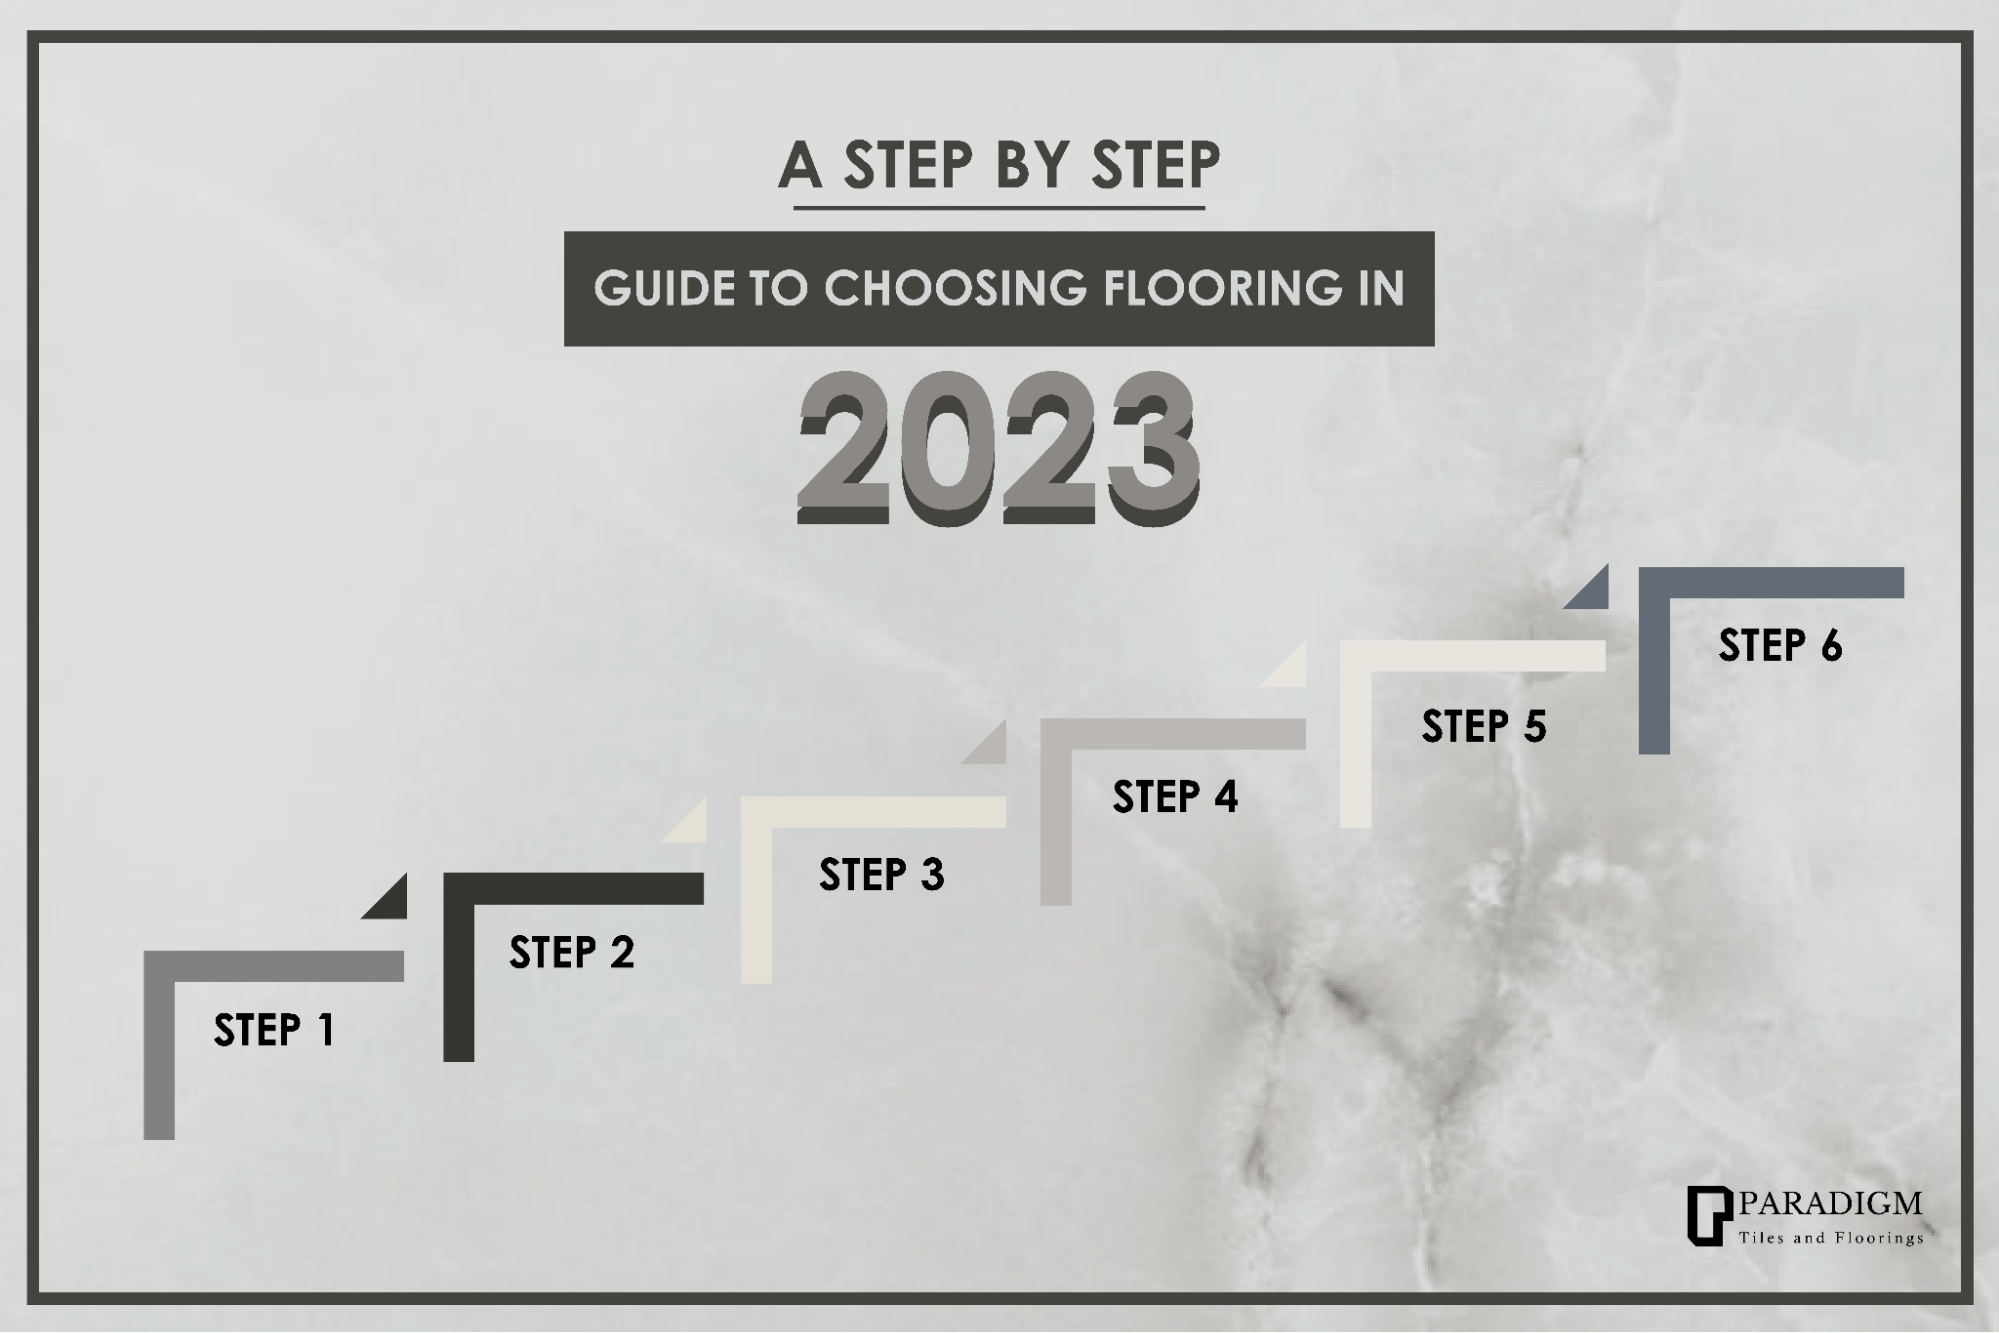 A Step-by-Step Guide to Choosing Flooring in 2023